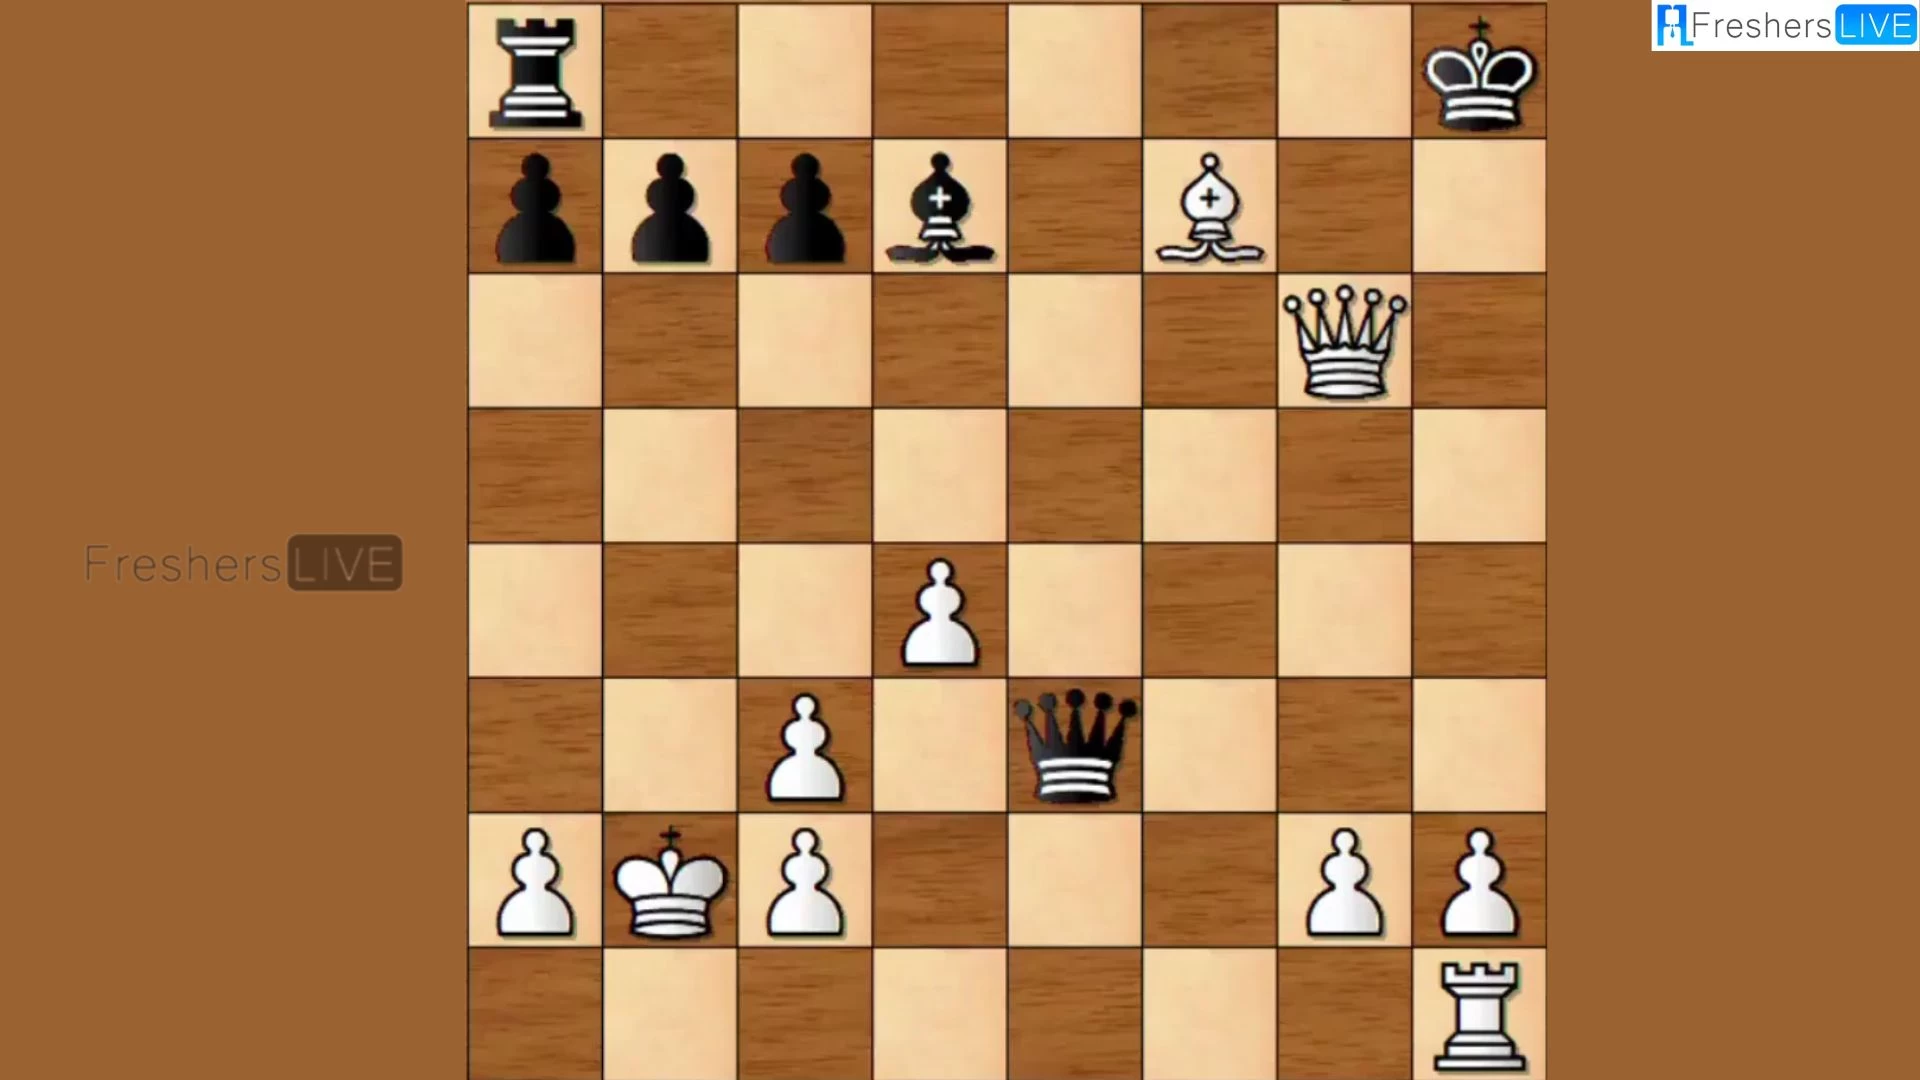 Can You Solve This Chess Puzzle in Four White Moves?